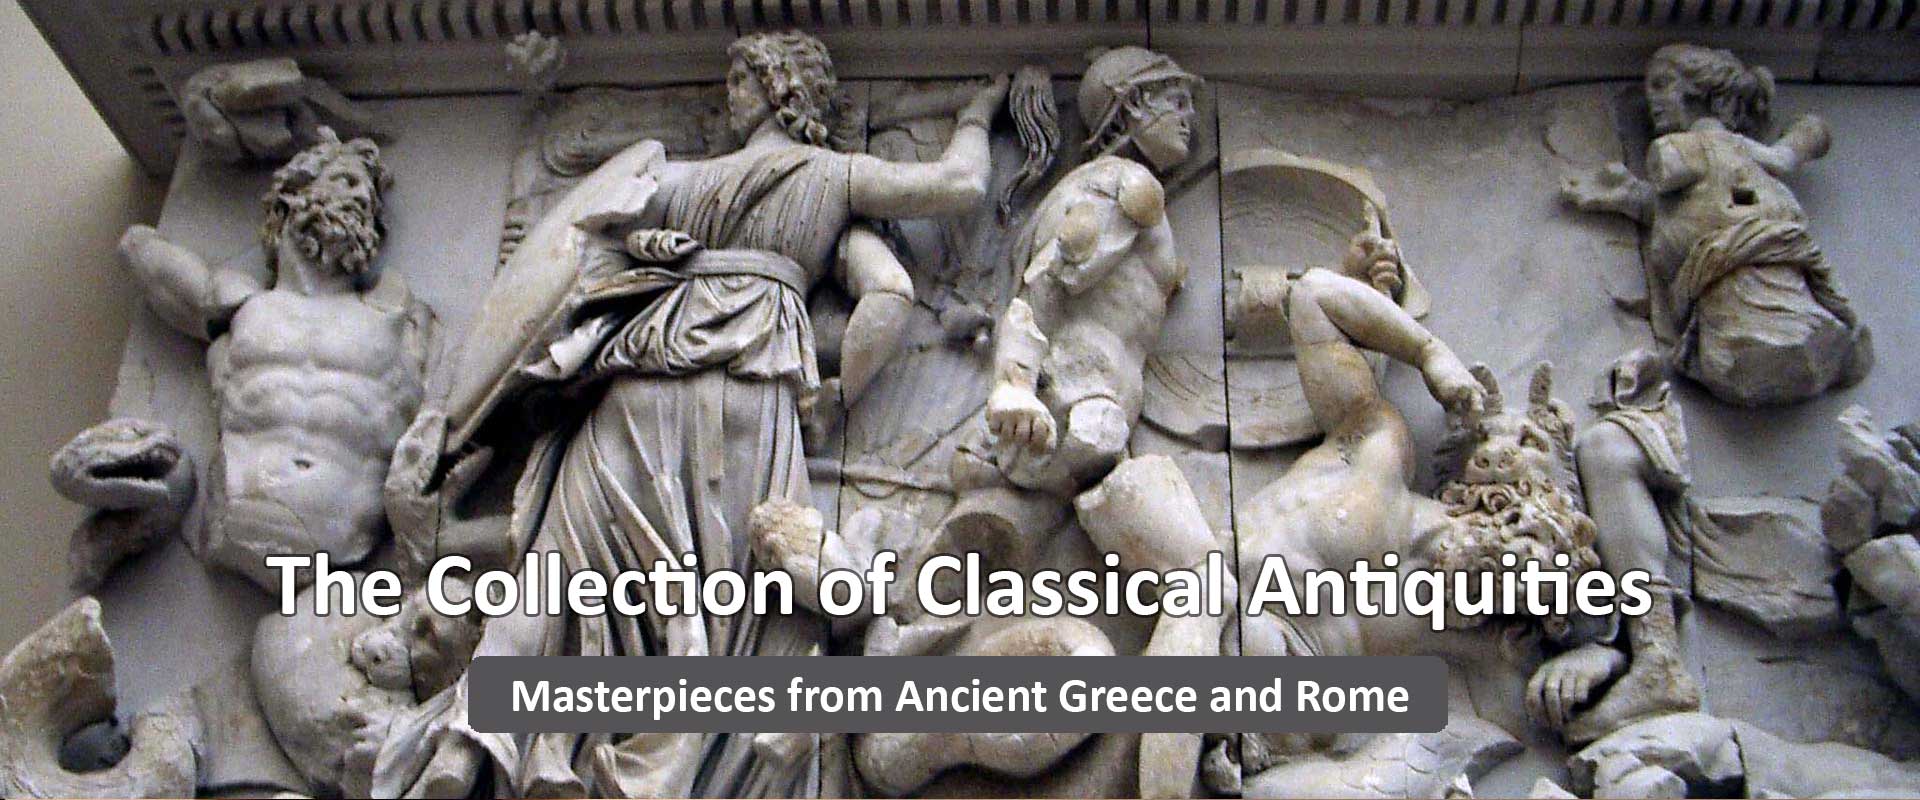 The Collection of Classical Antiquities